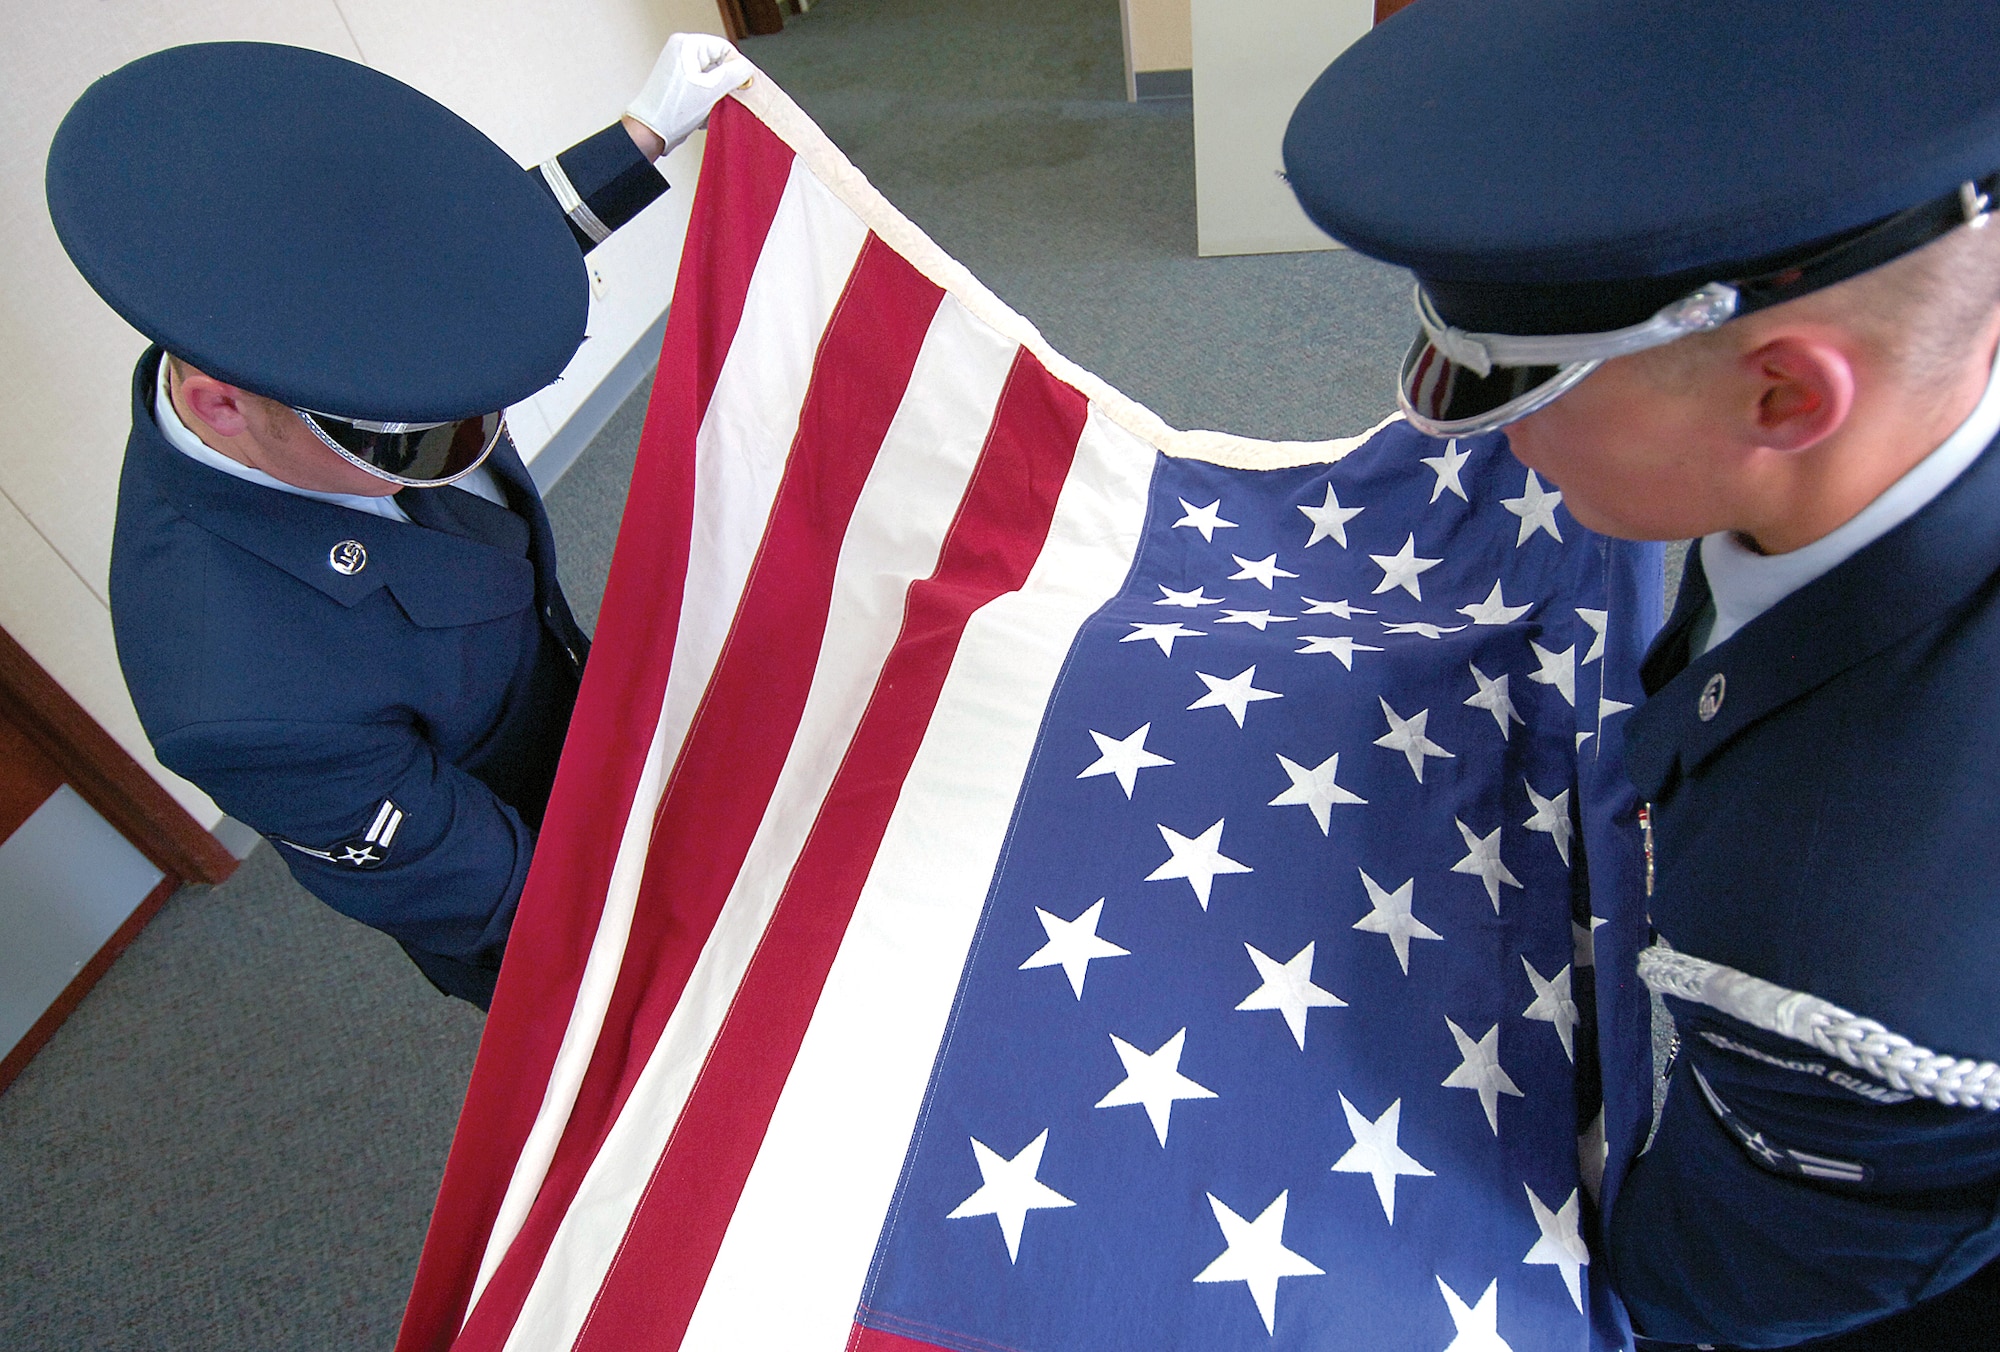 Tinker Honor Guard members regularly practice how to drape, remove and fold a flag from a casket. A training casket and flag in their Bldg. 244 office are reliable tools preparing them for actual funerals. (Air Force photo by Margo Wright)